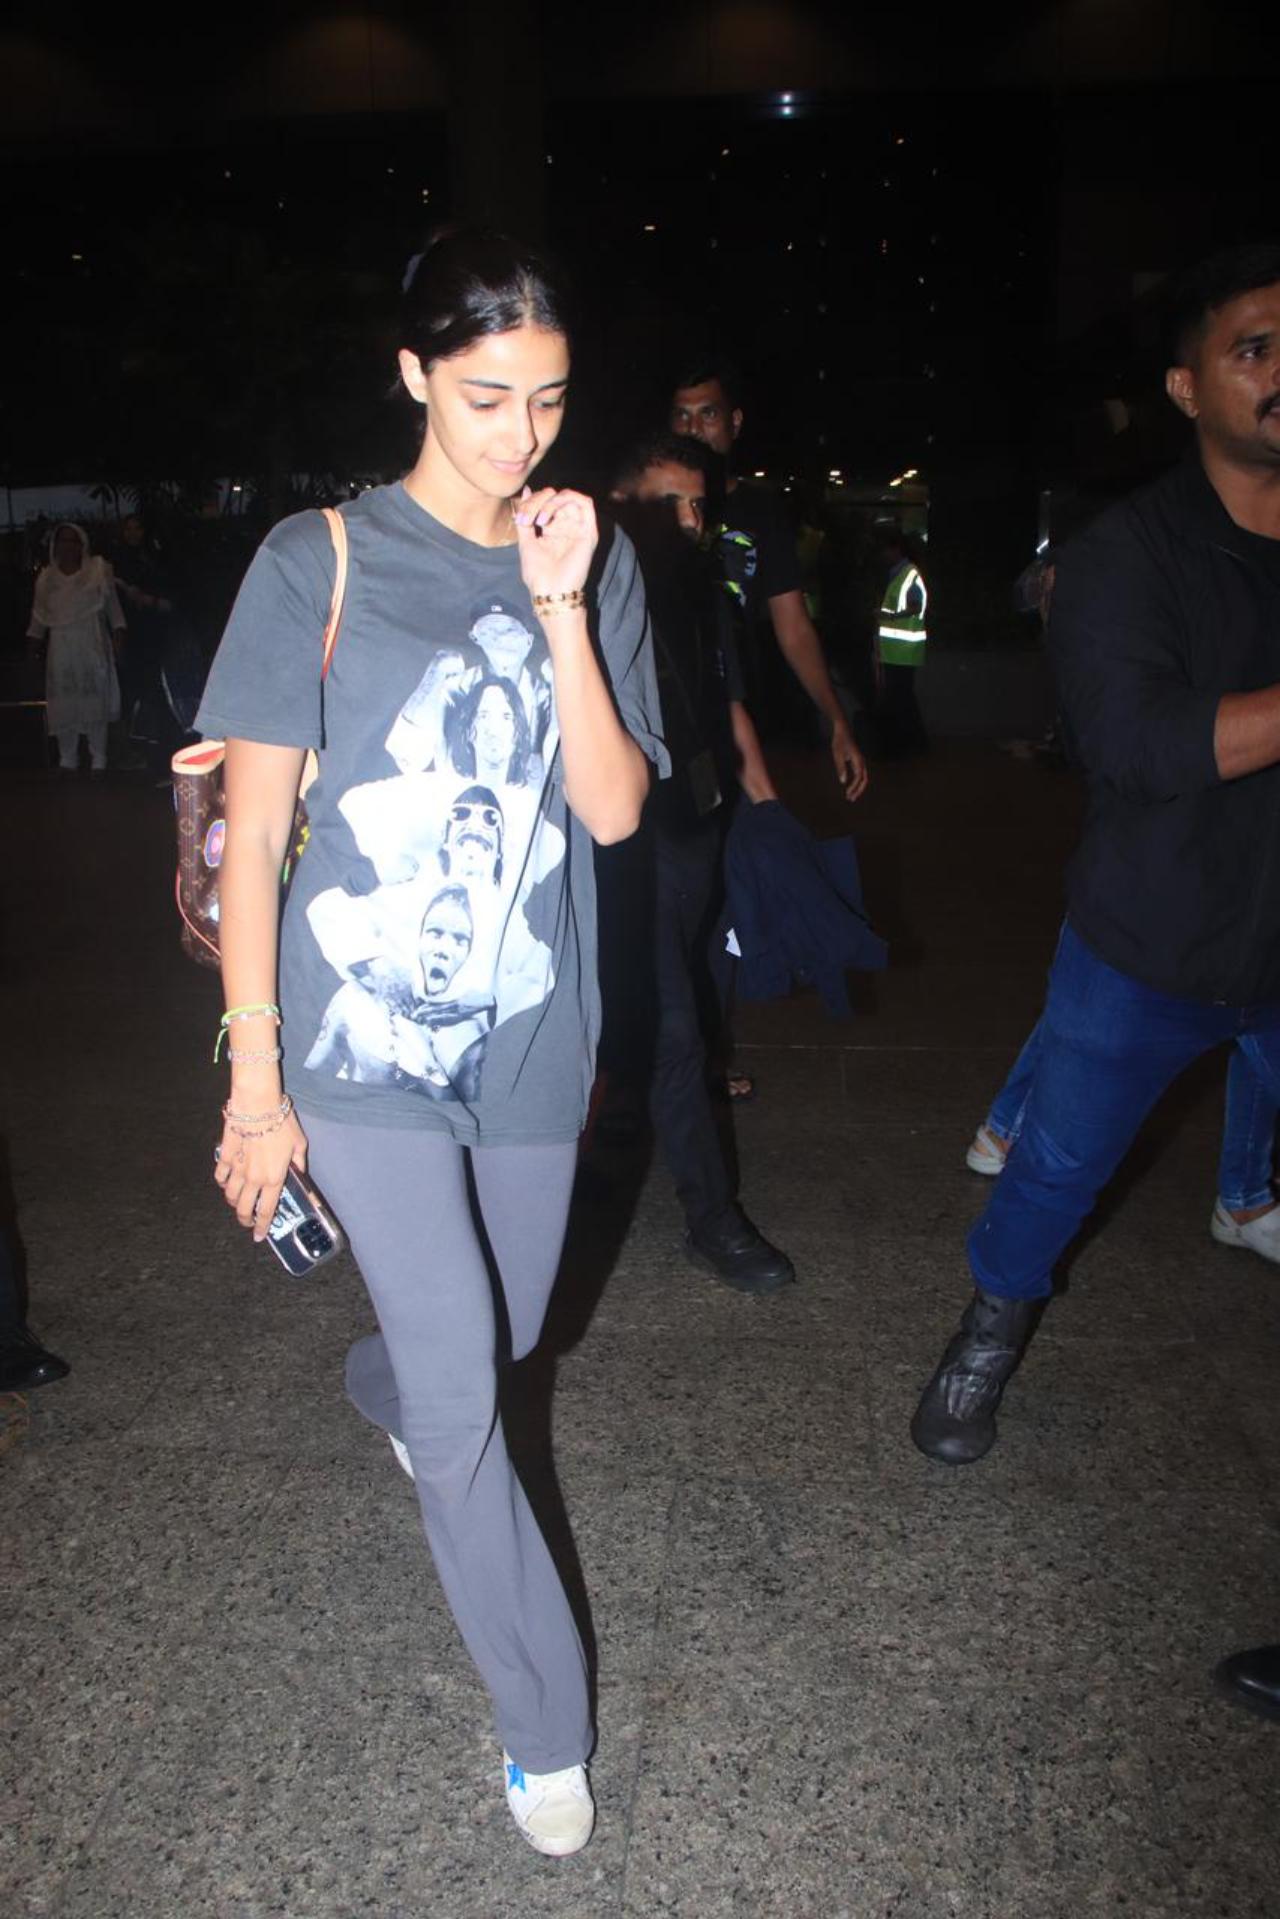 A little after Aditya stepped out, Ananya Panday was also seen exiting the airport